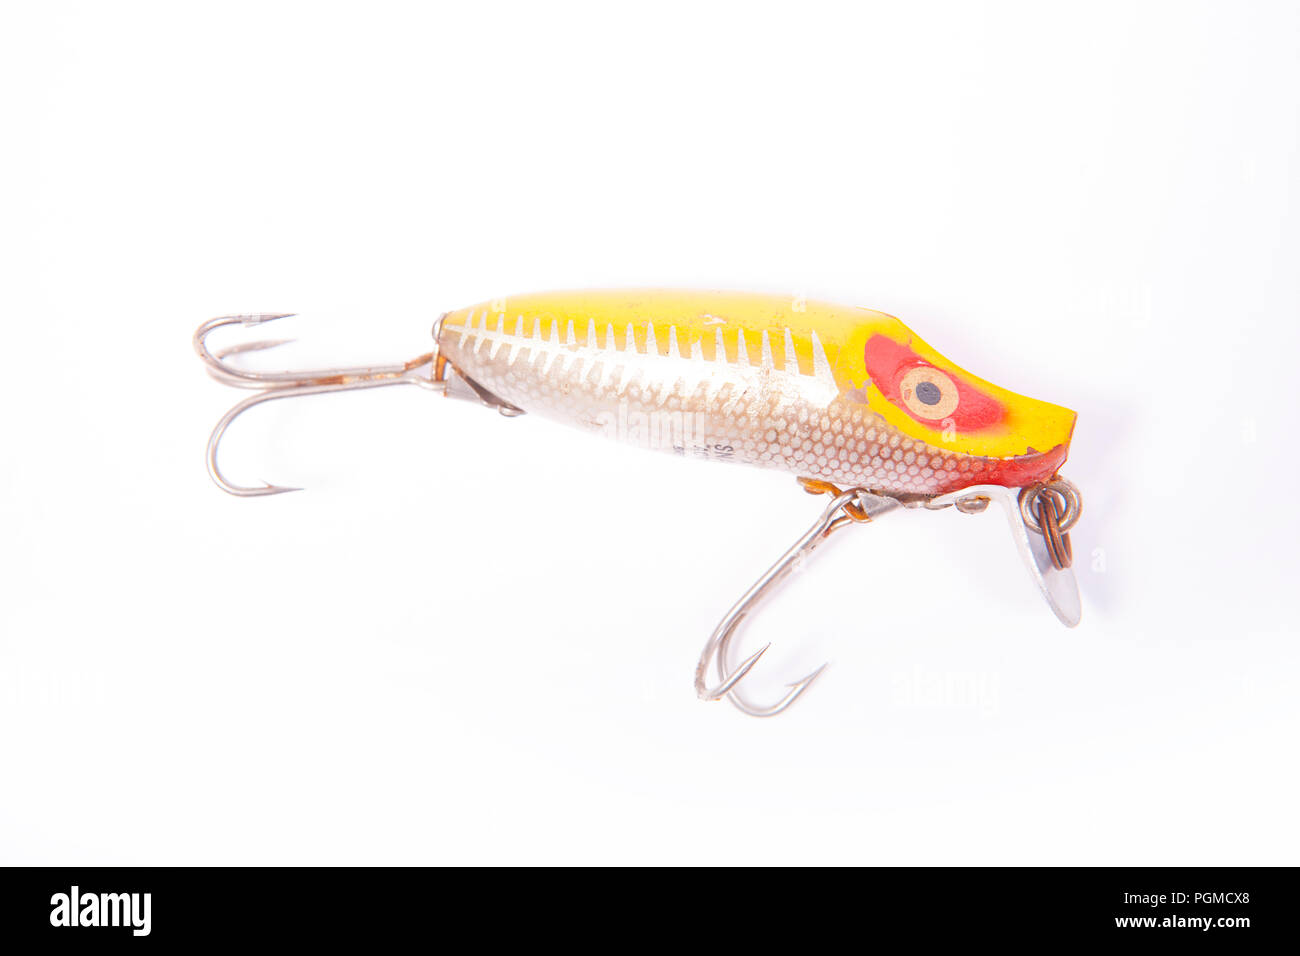 https://c8.alamy.com/comp/PGMCX8/a-british-snapdragon-fishing-lure-or-plug-designed-for-catching-predatory-fish-from-a-collection-of-vintage-and-modern-fishing-tackle-north-dorset-PGMCX8.jpg